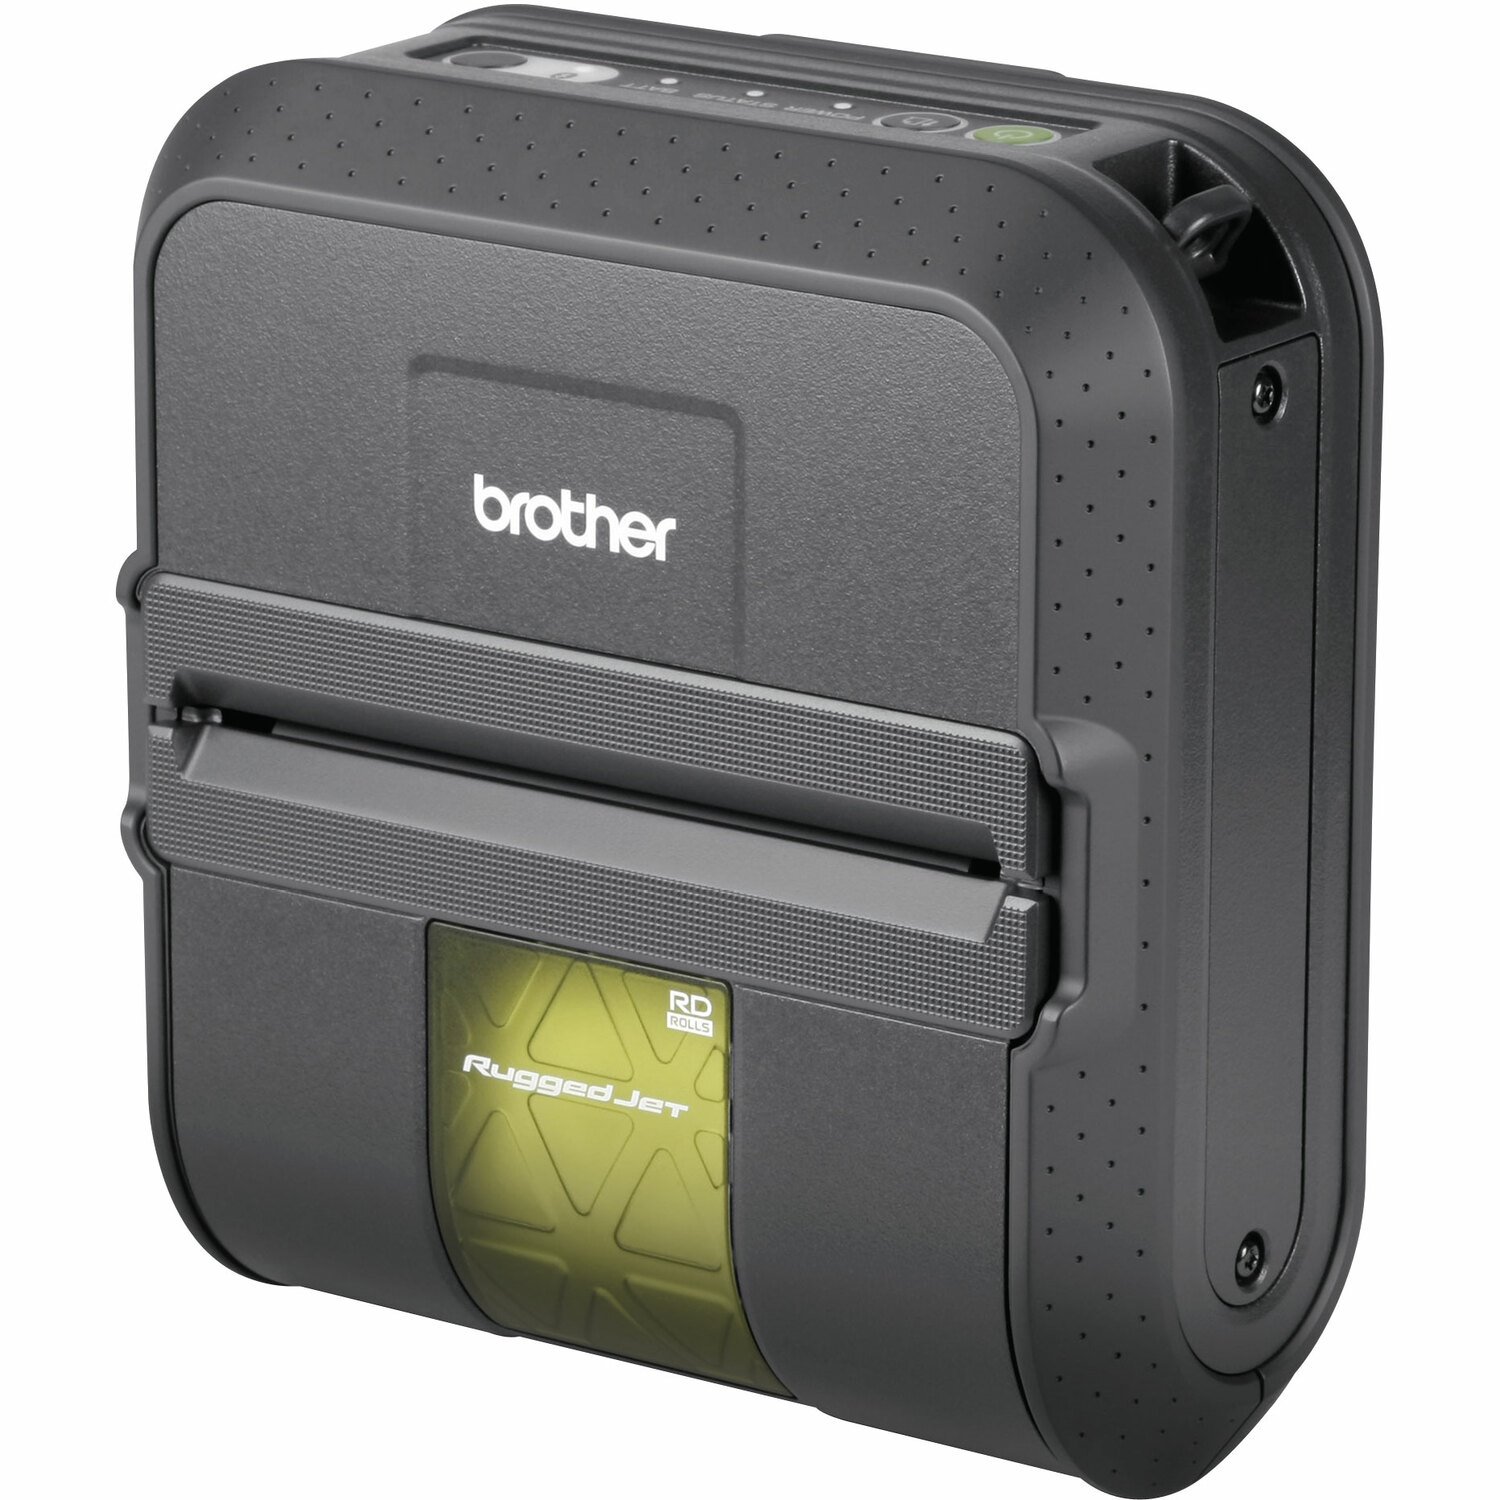 Brother RuggedJet RJ4030-K Direct Thermal Printer - Monochrome - Portable - Label Print - USB - Serial - Bluetooth - Battery Included